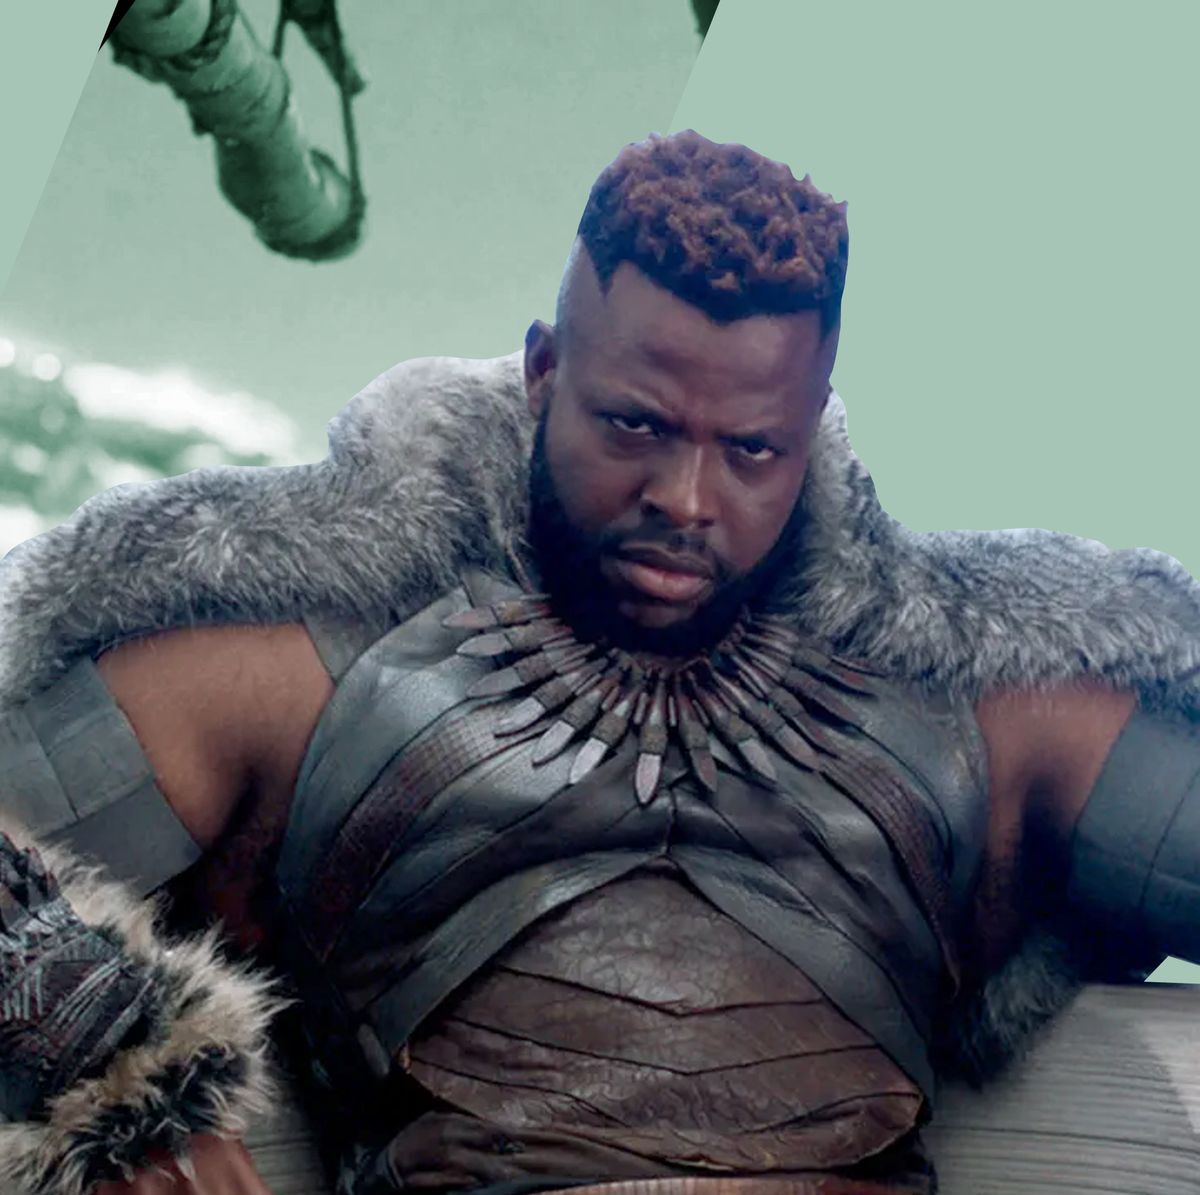 What Does M'Baku's Chant Mean in Black Panther?